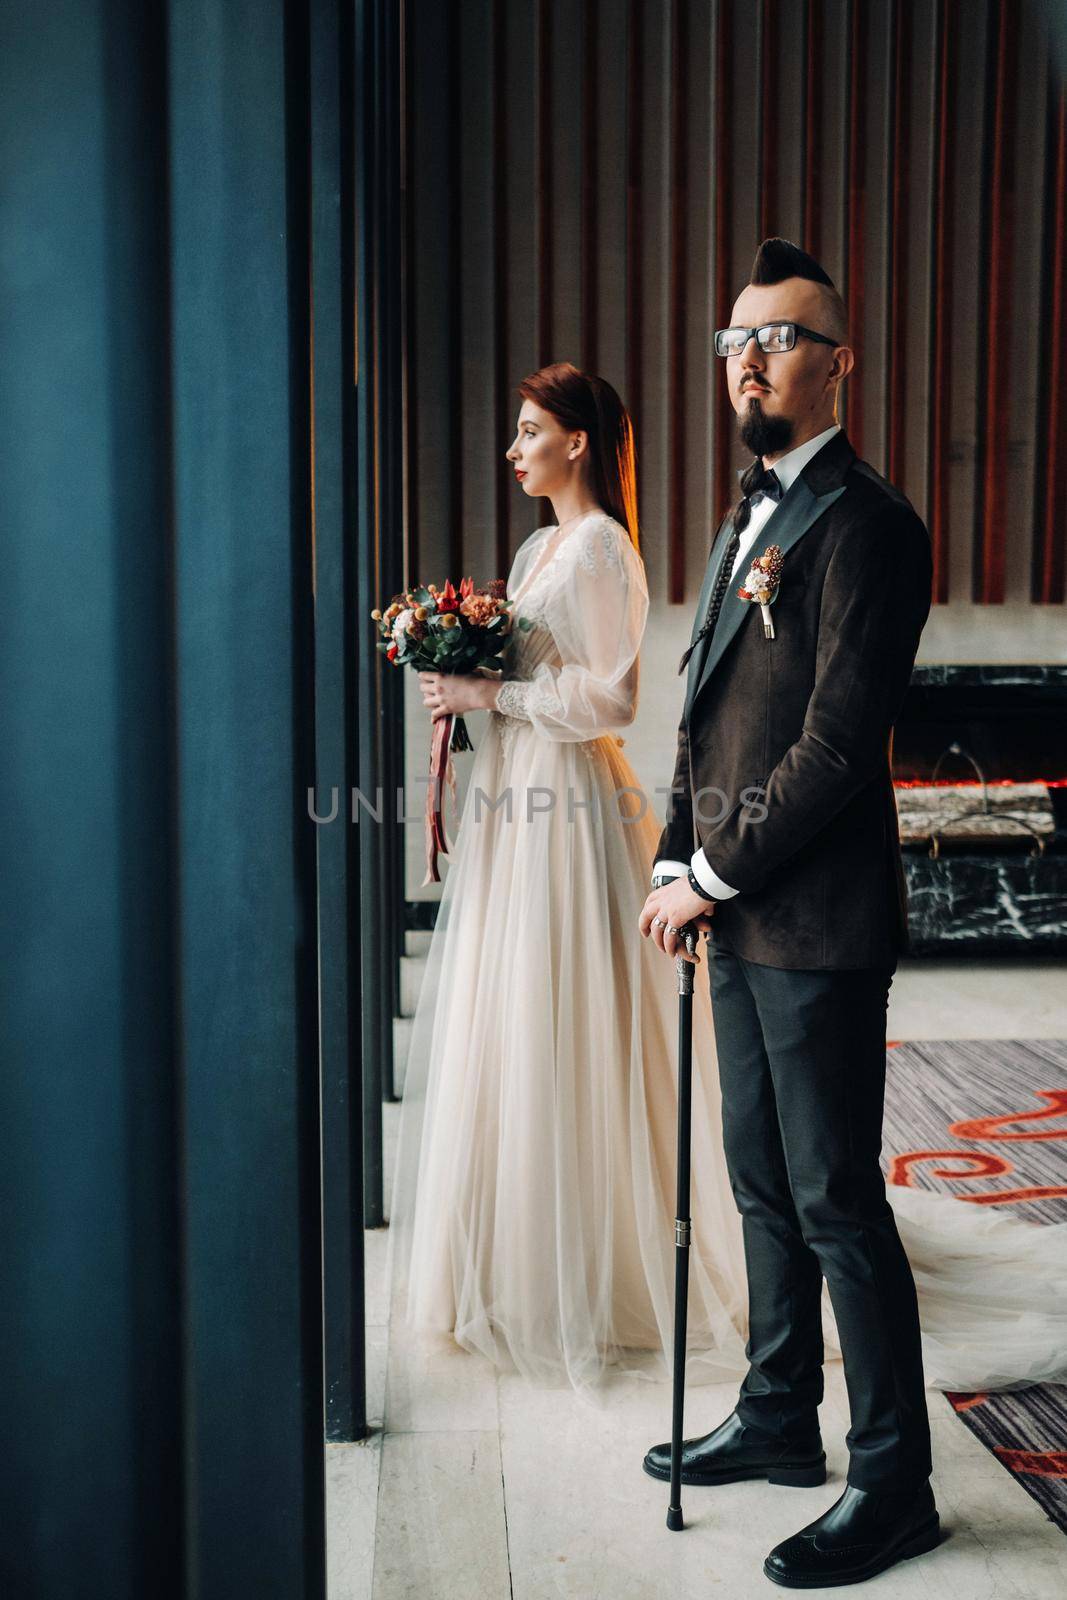 Stylish wedding couple in the interior. Glamorous bride and groom.